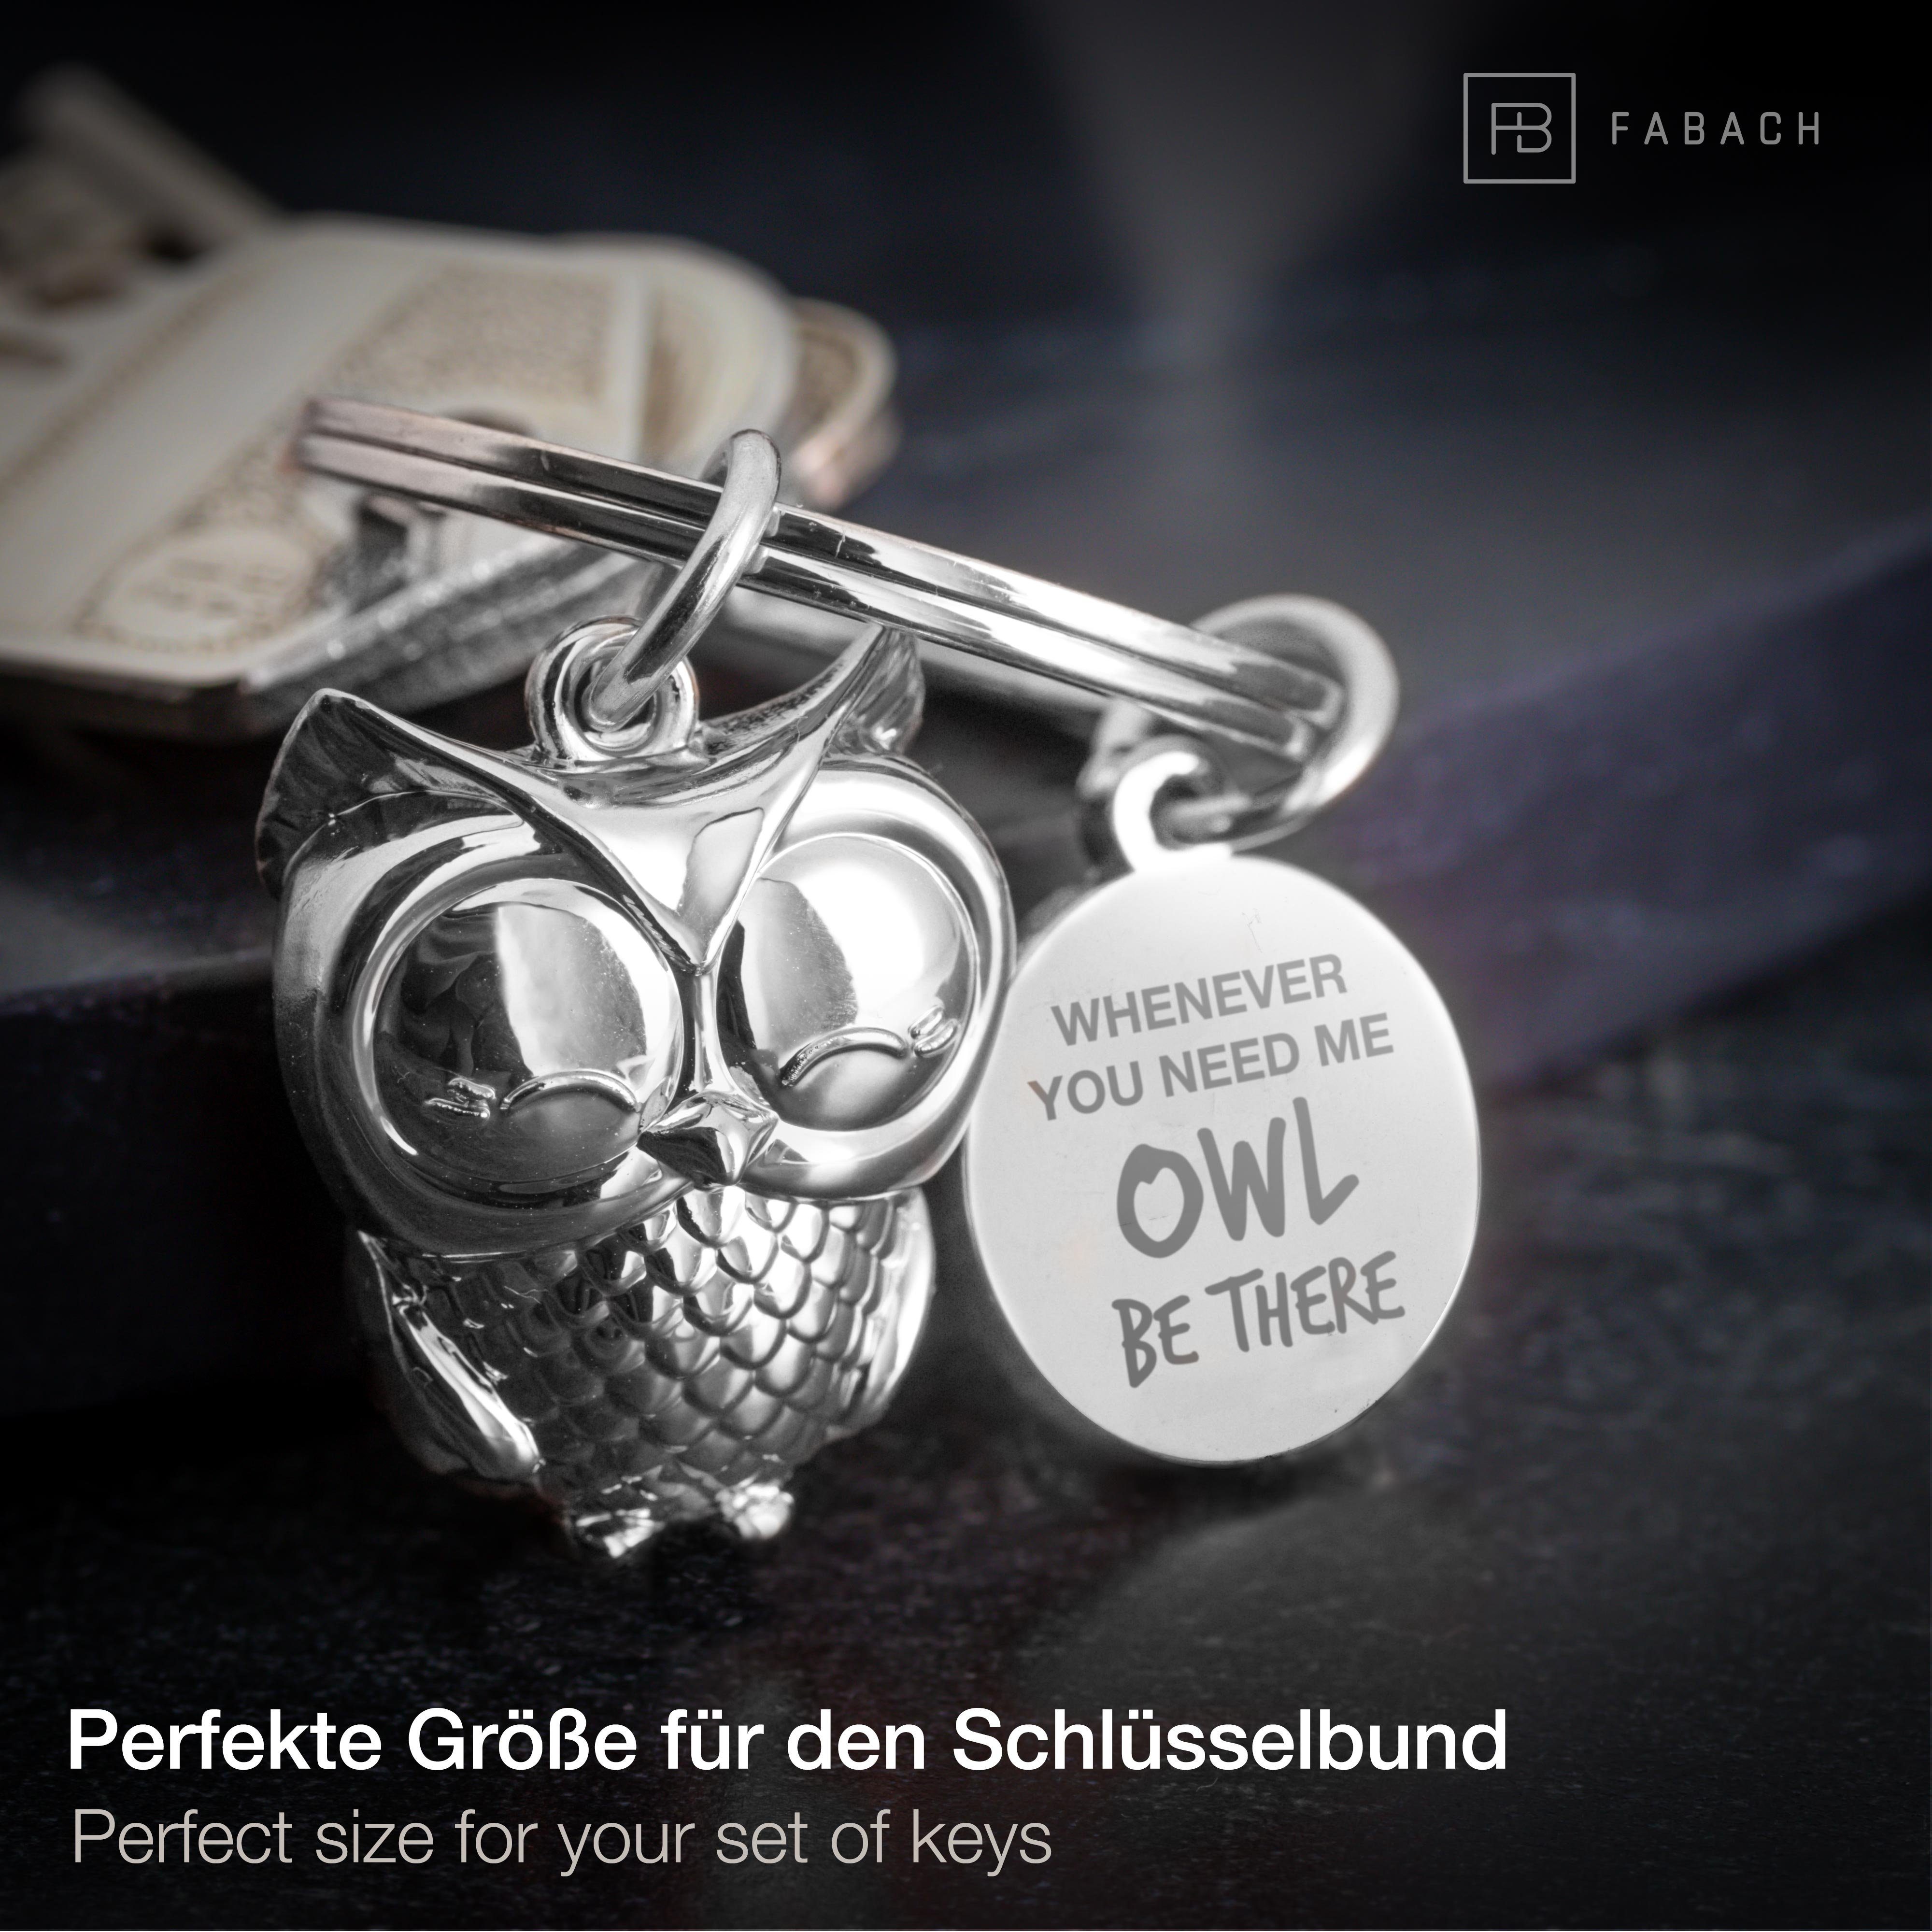 need Owly you there Whenever Gravur FABACH - Silber be Glücksbringer owl me Eule Schlüsselanhänger